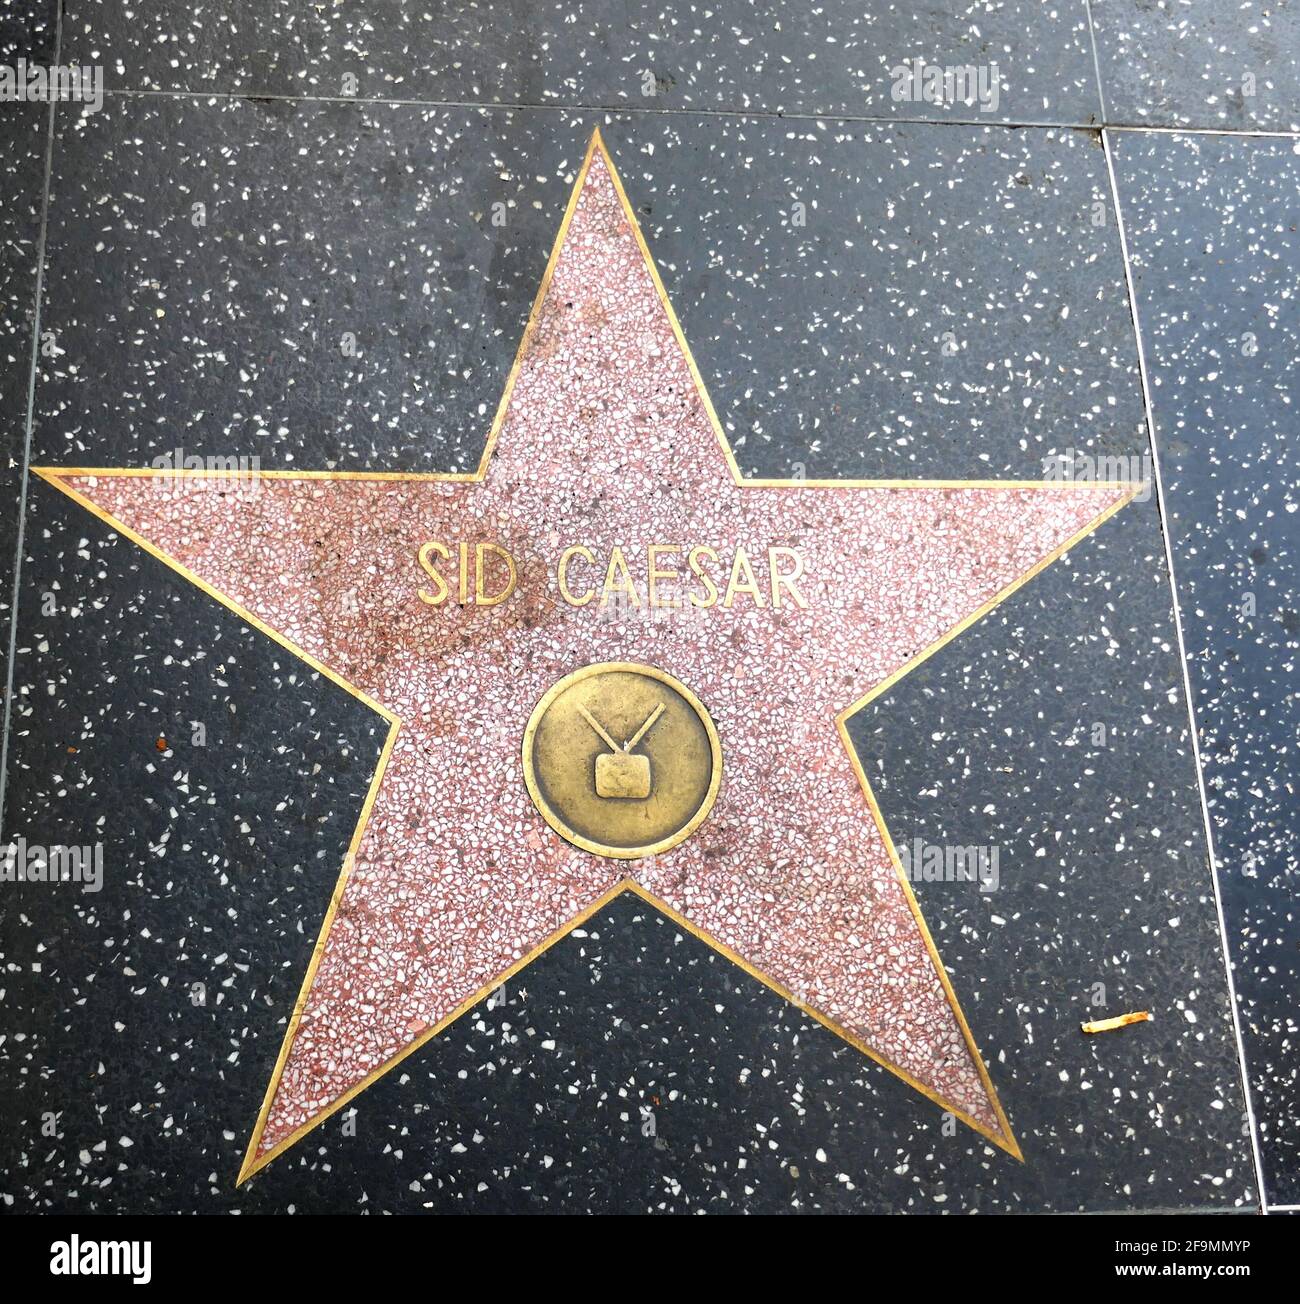 Hollywood, California, USA 17th April 2021 A general view of atmosphere of comedian Sid Caesar's Star on the Hollywood Walk of Fame on April 17, 2021 in Hollywood, California, USA. Photo by Barry King/Alamy Stock Photo Stock Photo